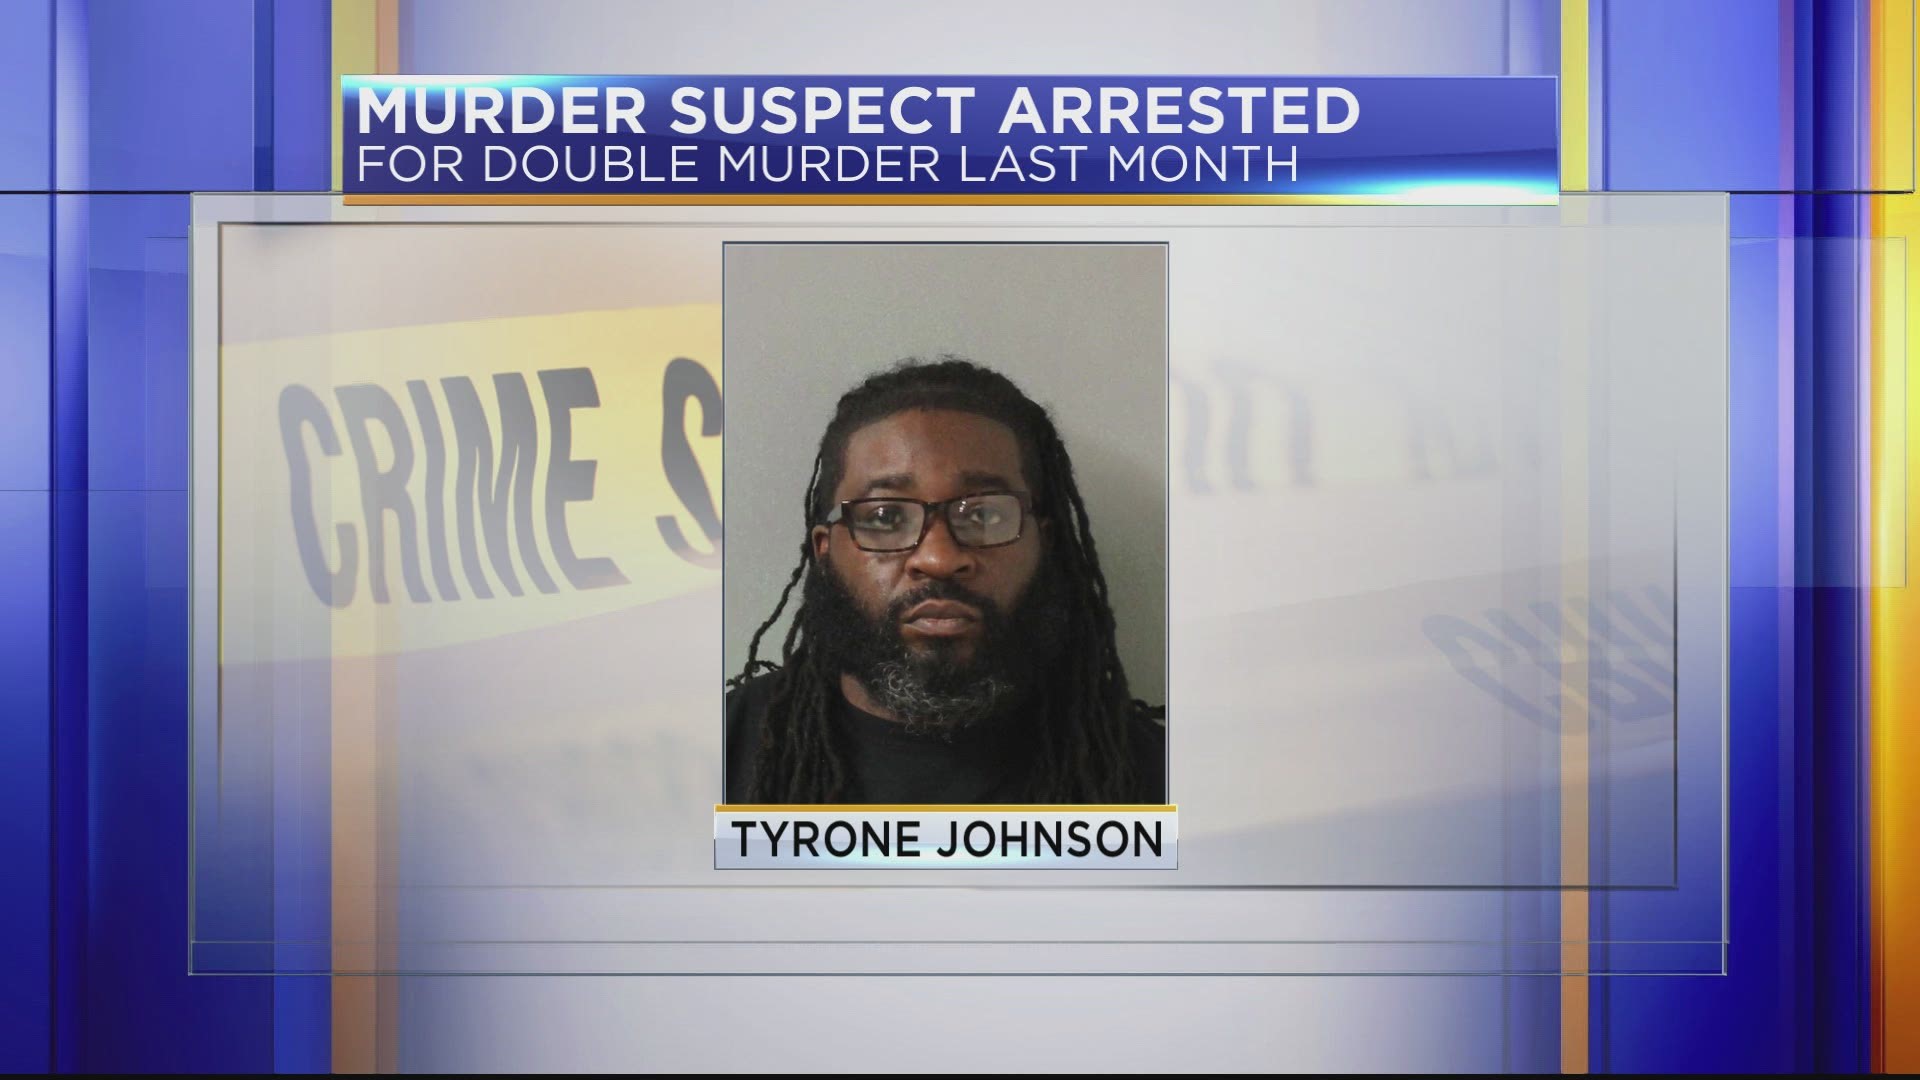 Tyrone Johnson was arrested in Nashville in an investigation involving multiple jurisdictions.